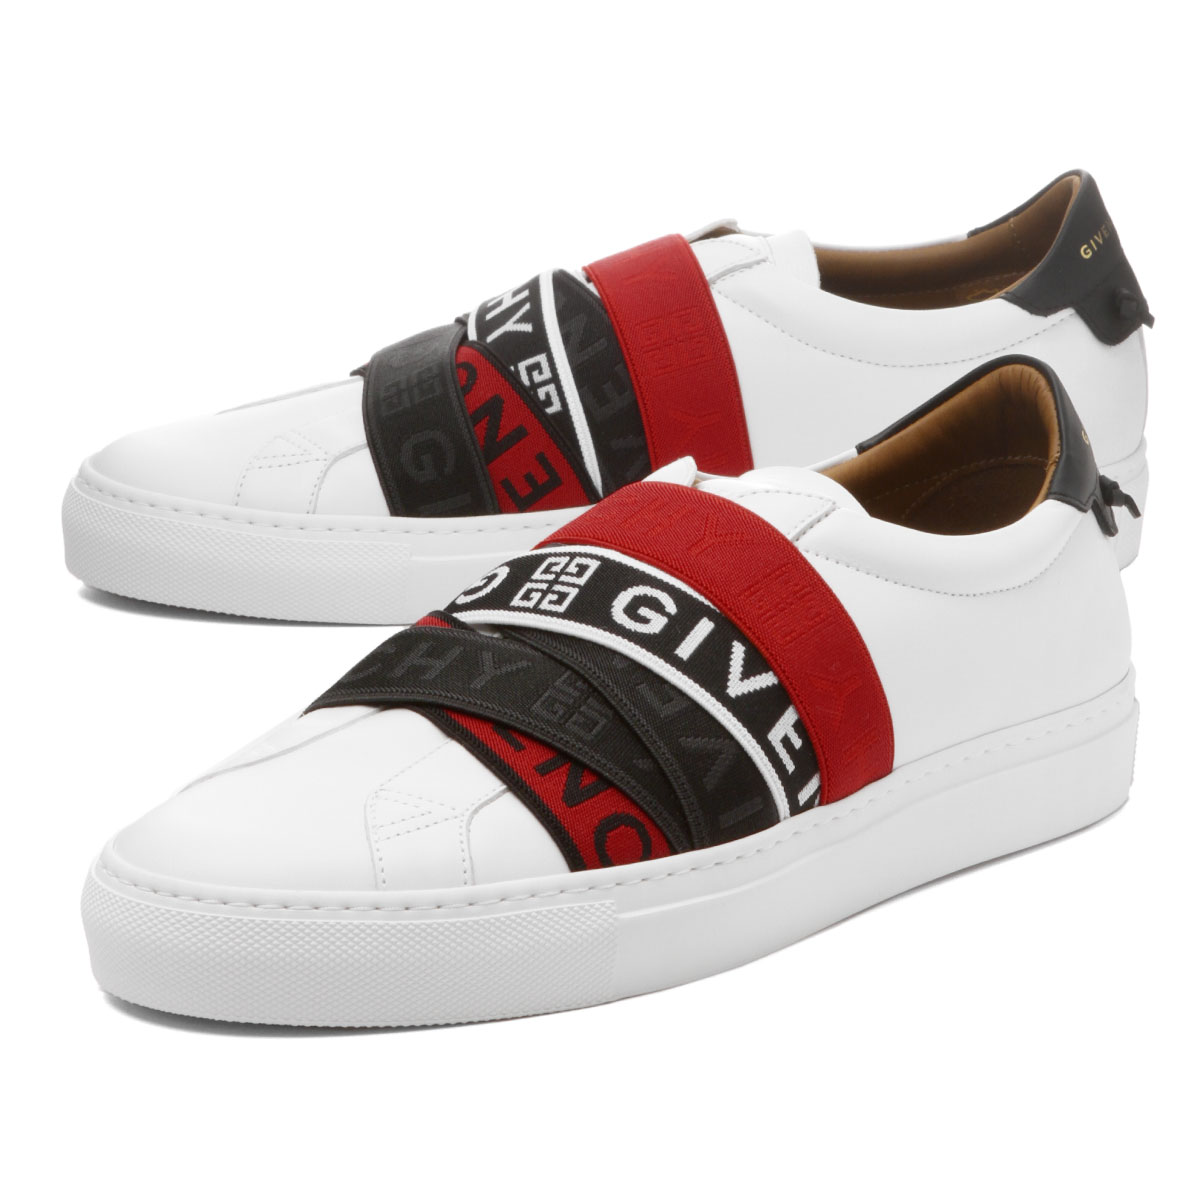 red black and white sneakers